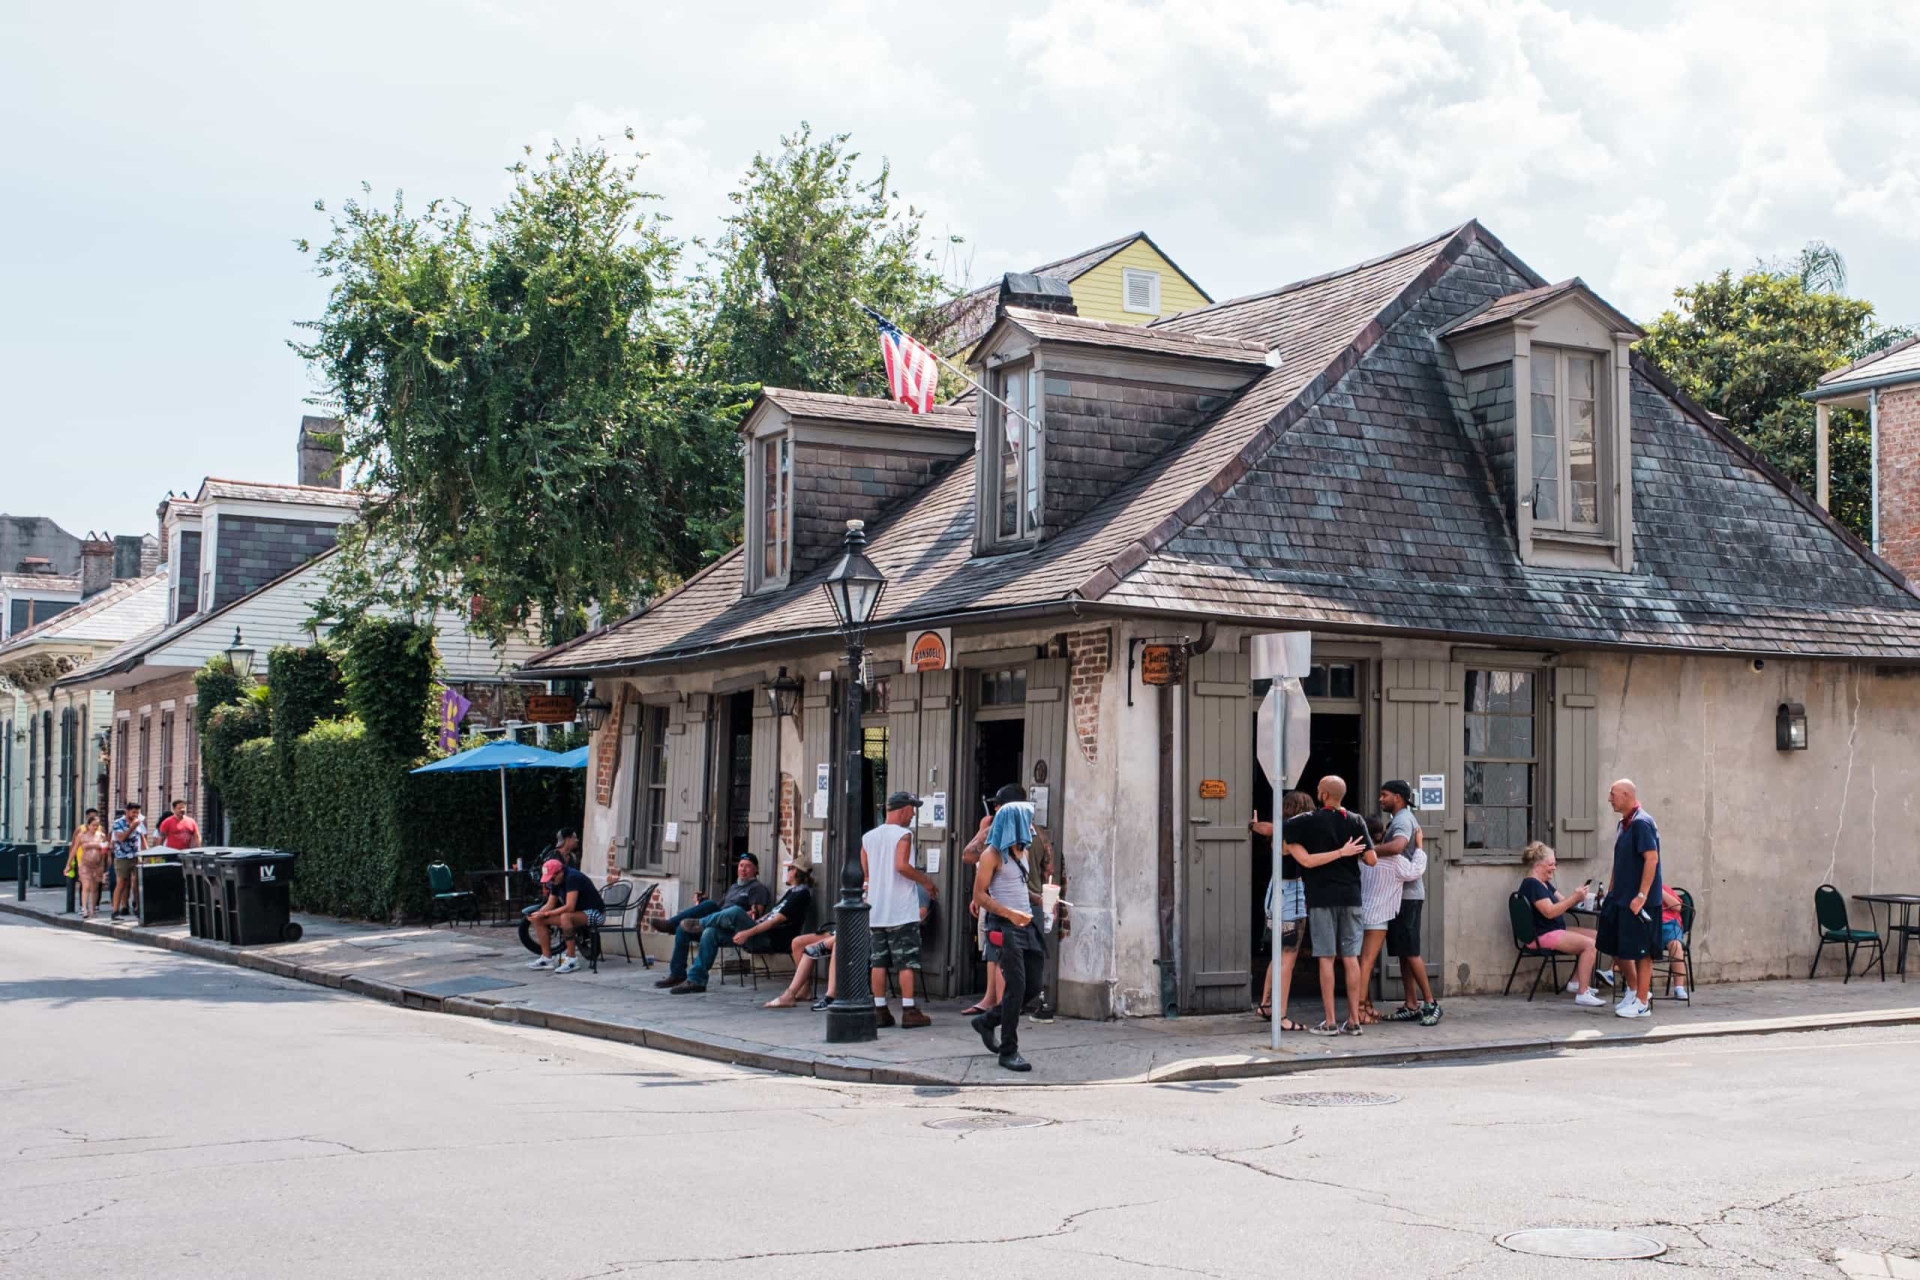 <p>Lafitte's Blacksmith Shop served its first beer in the 1770s, and is one of the oldest surviving structures in the city. Order a brew and soak in the atmosphere.</p><p><a href="https://www.msn.com/en-us/community/channel/vid-7xx8mnucu55yw63we9va2gwr7uihbxwc68fxqp25x6tg4ftibpra?cvid=94631541bc0f4f89bfd59158d696ad7e">Follow us and access great exclusive content every day</a></p>